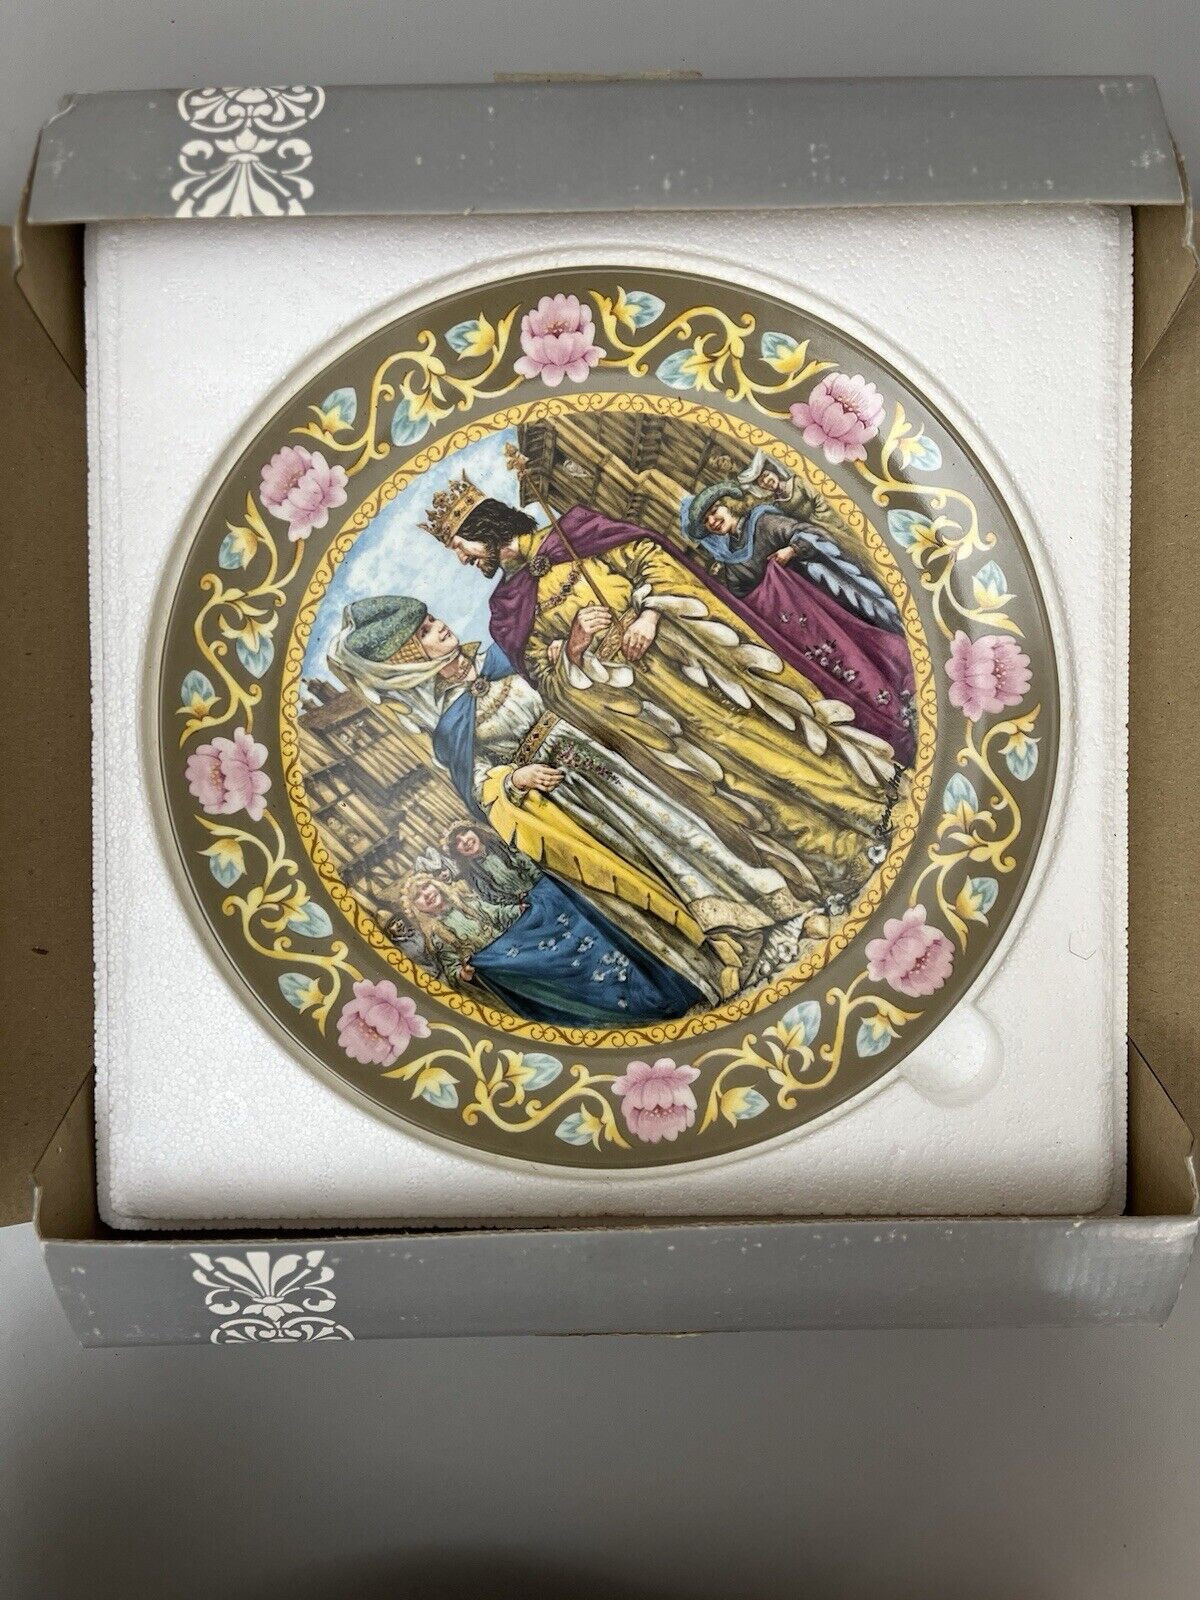 THE WEDDING OF ARTHUR AND GUINEVERE PLATE THE LEGEND OF KING ARTHUR WEDGWOOD 